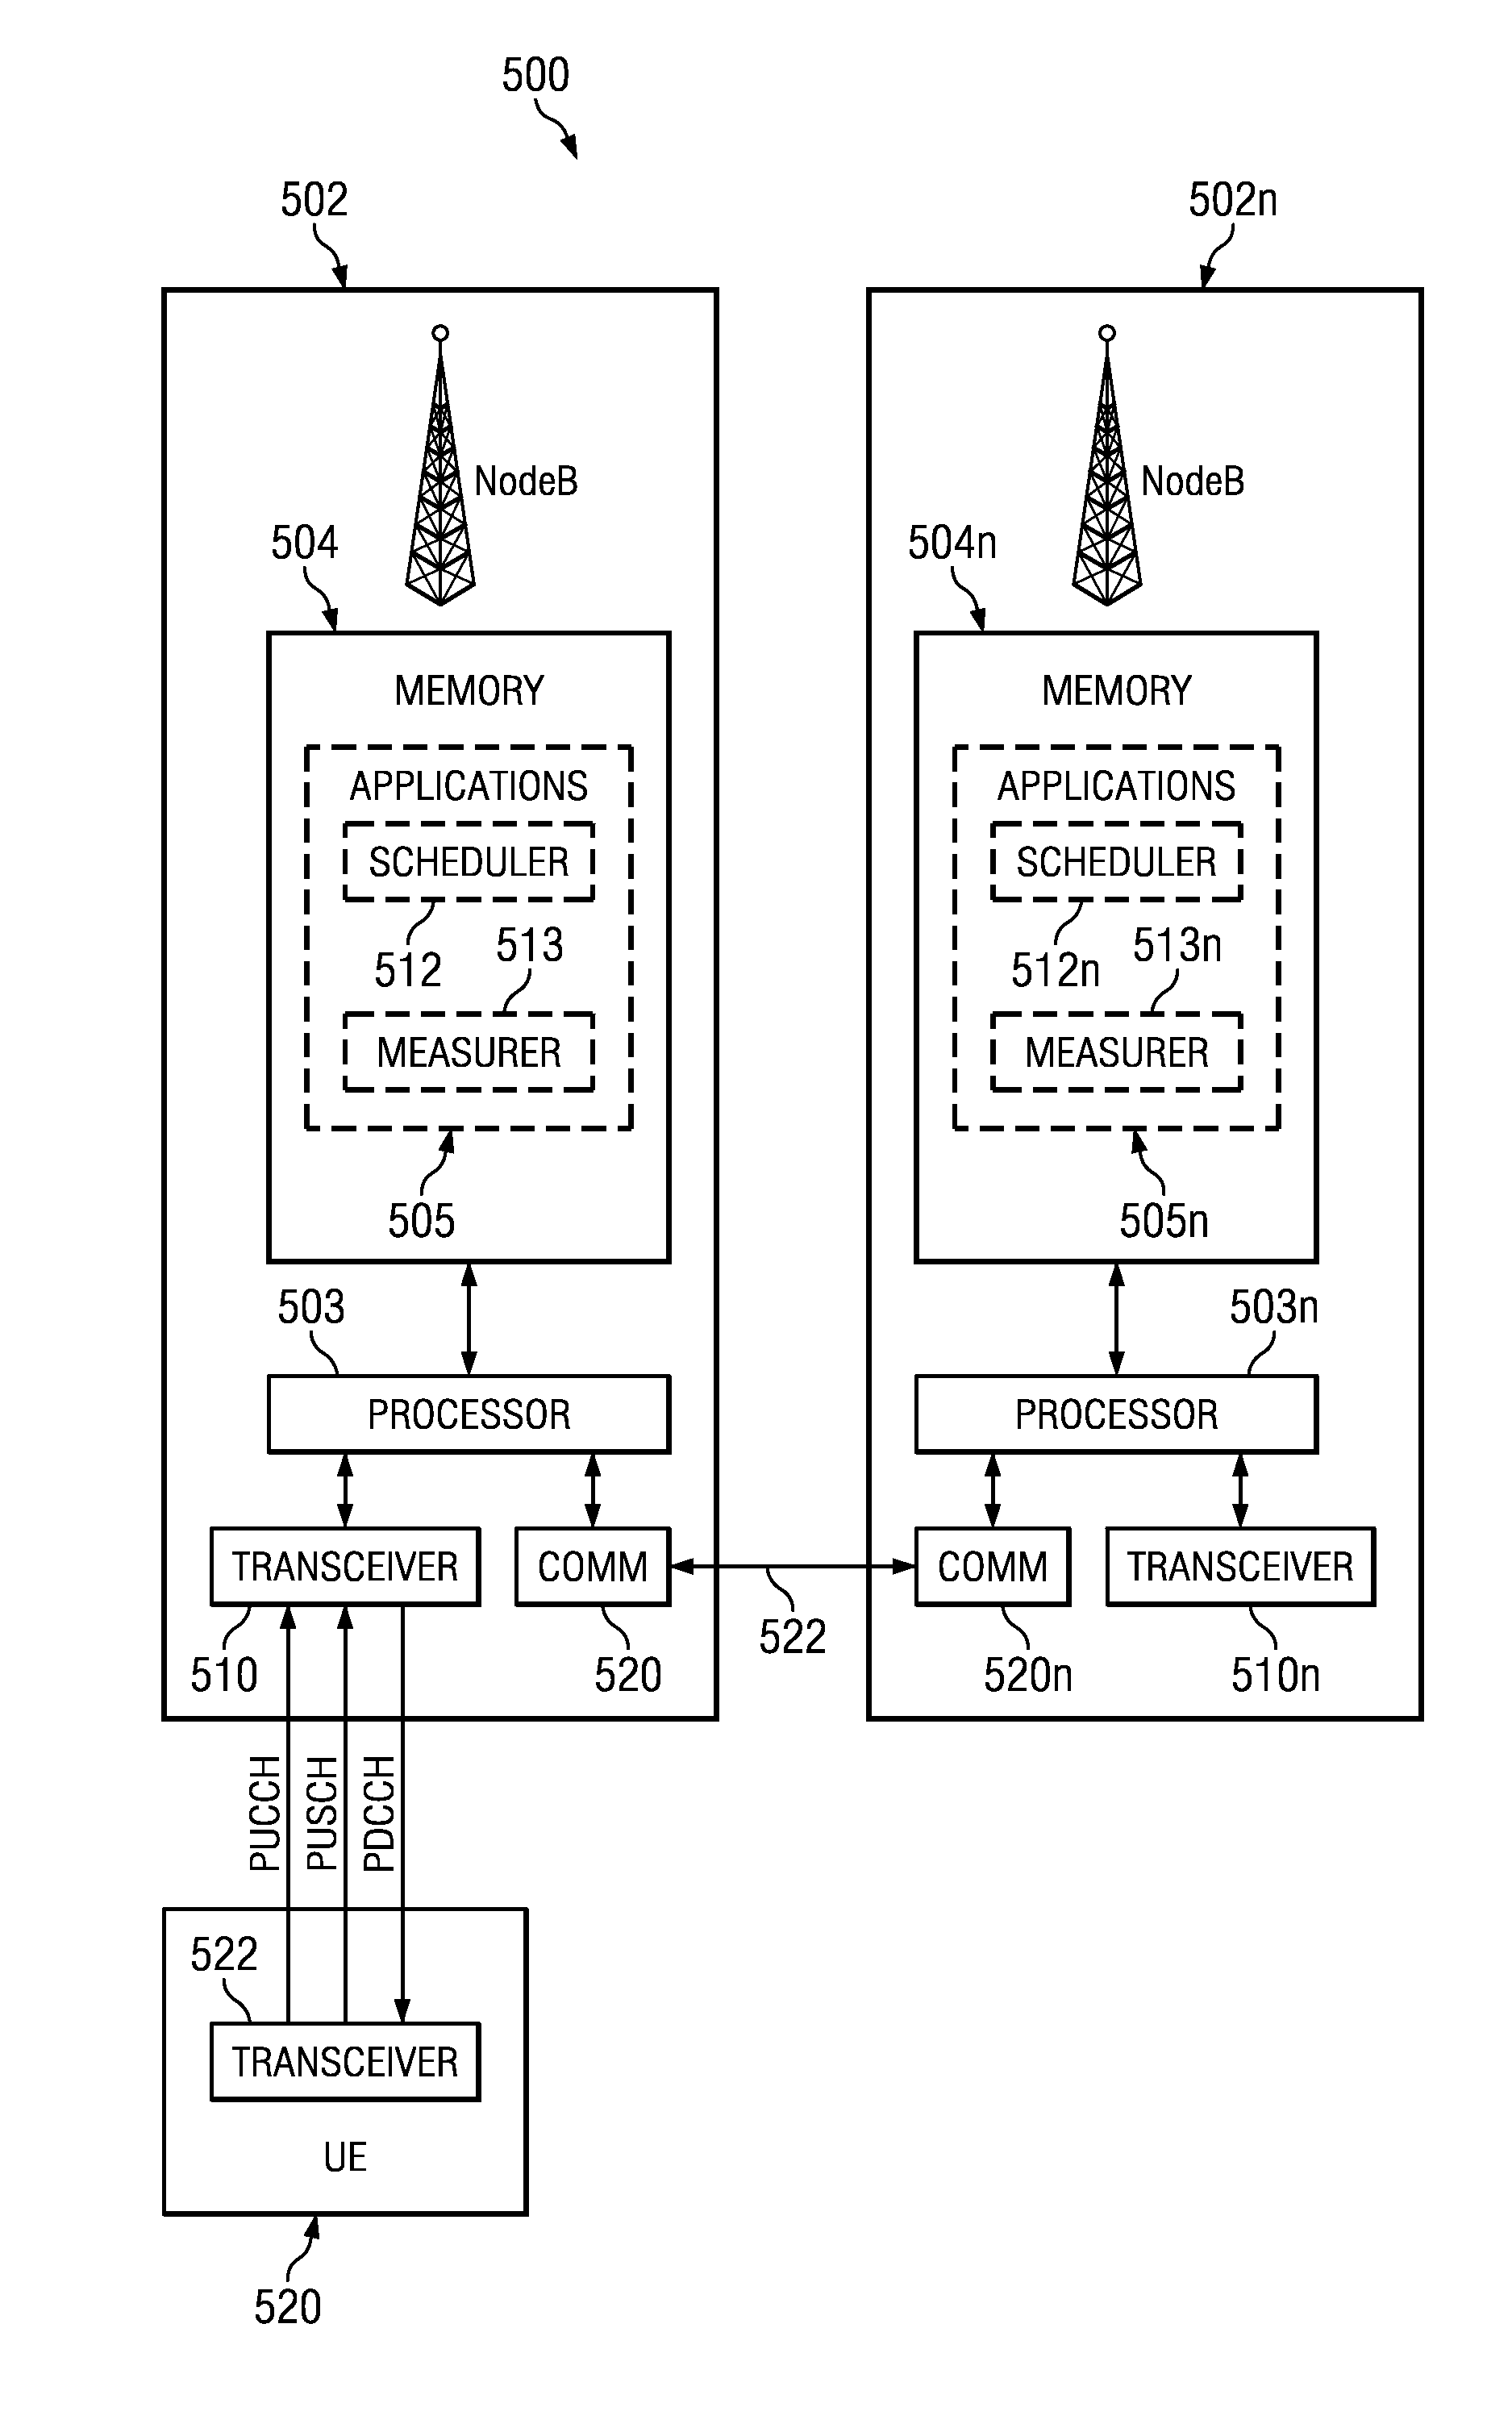 Network-based inter-cell power control for multi-channel wireless networks